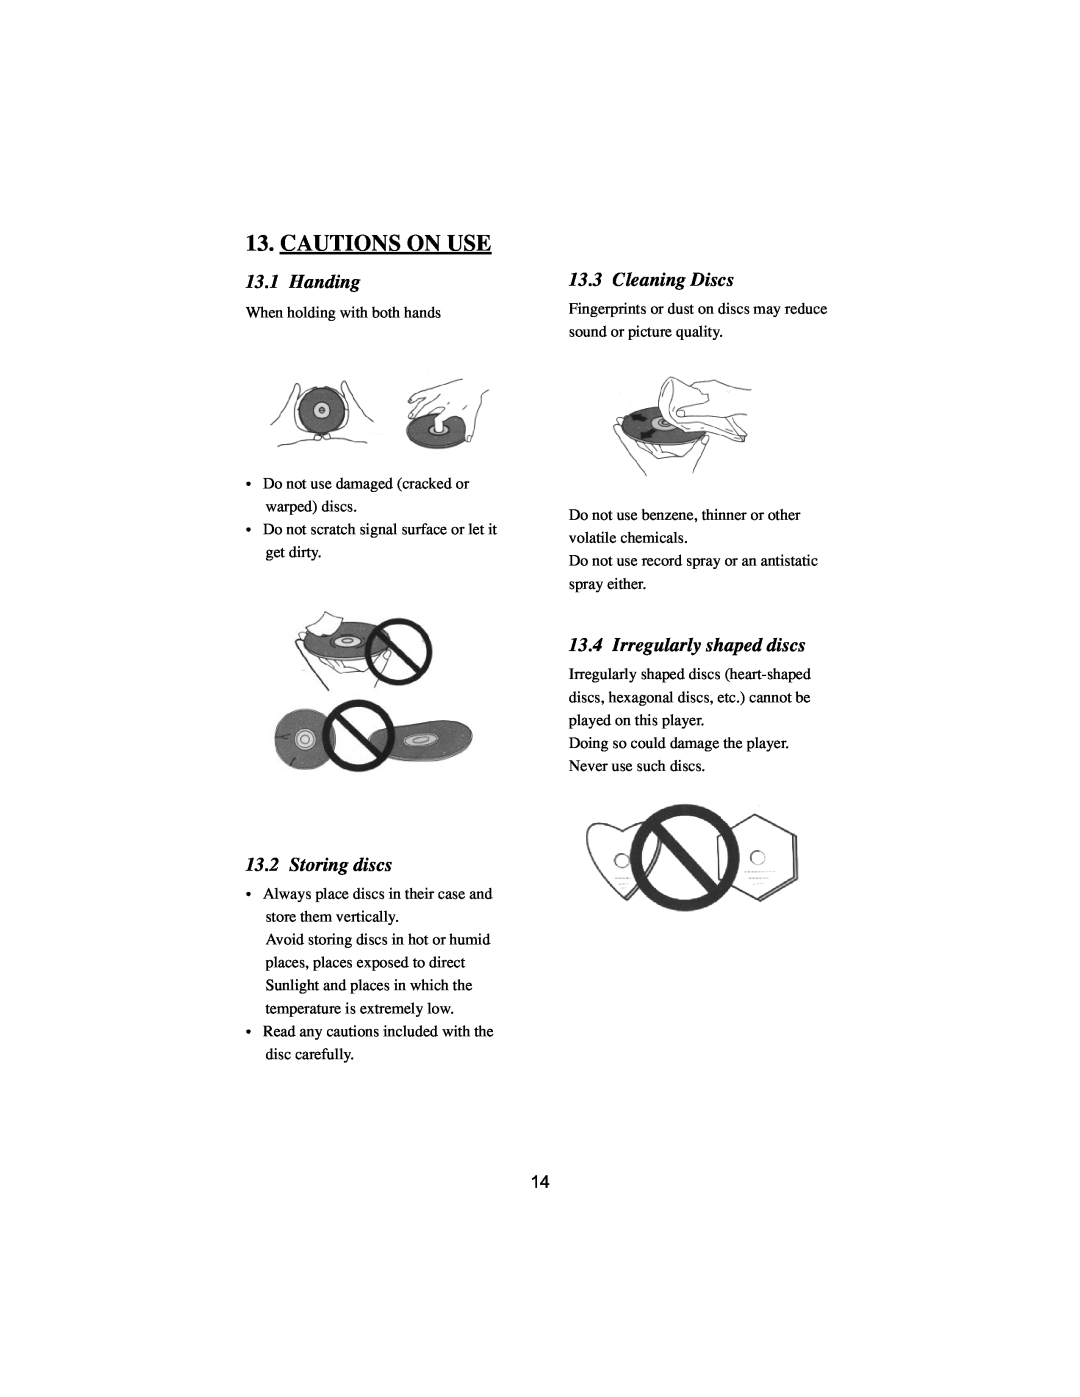 PYLE Audio DVD manual Cautions On Use, Handing, Cleaning Discs, Storing discs, Irregularly shaped discs 